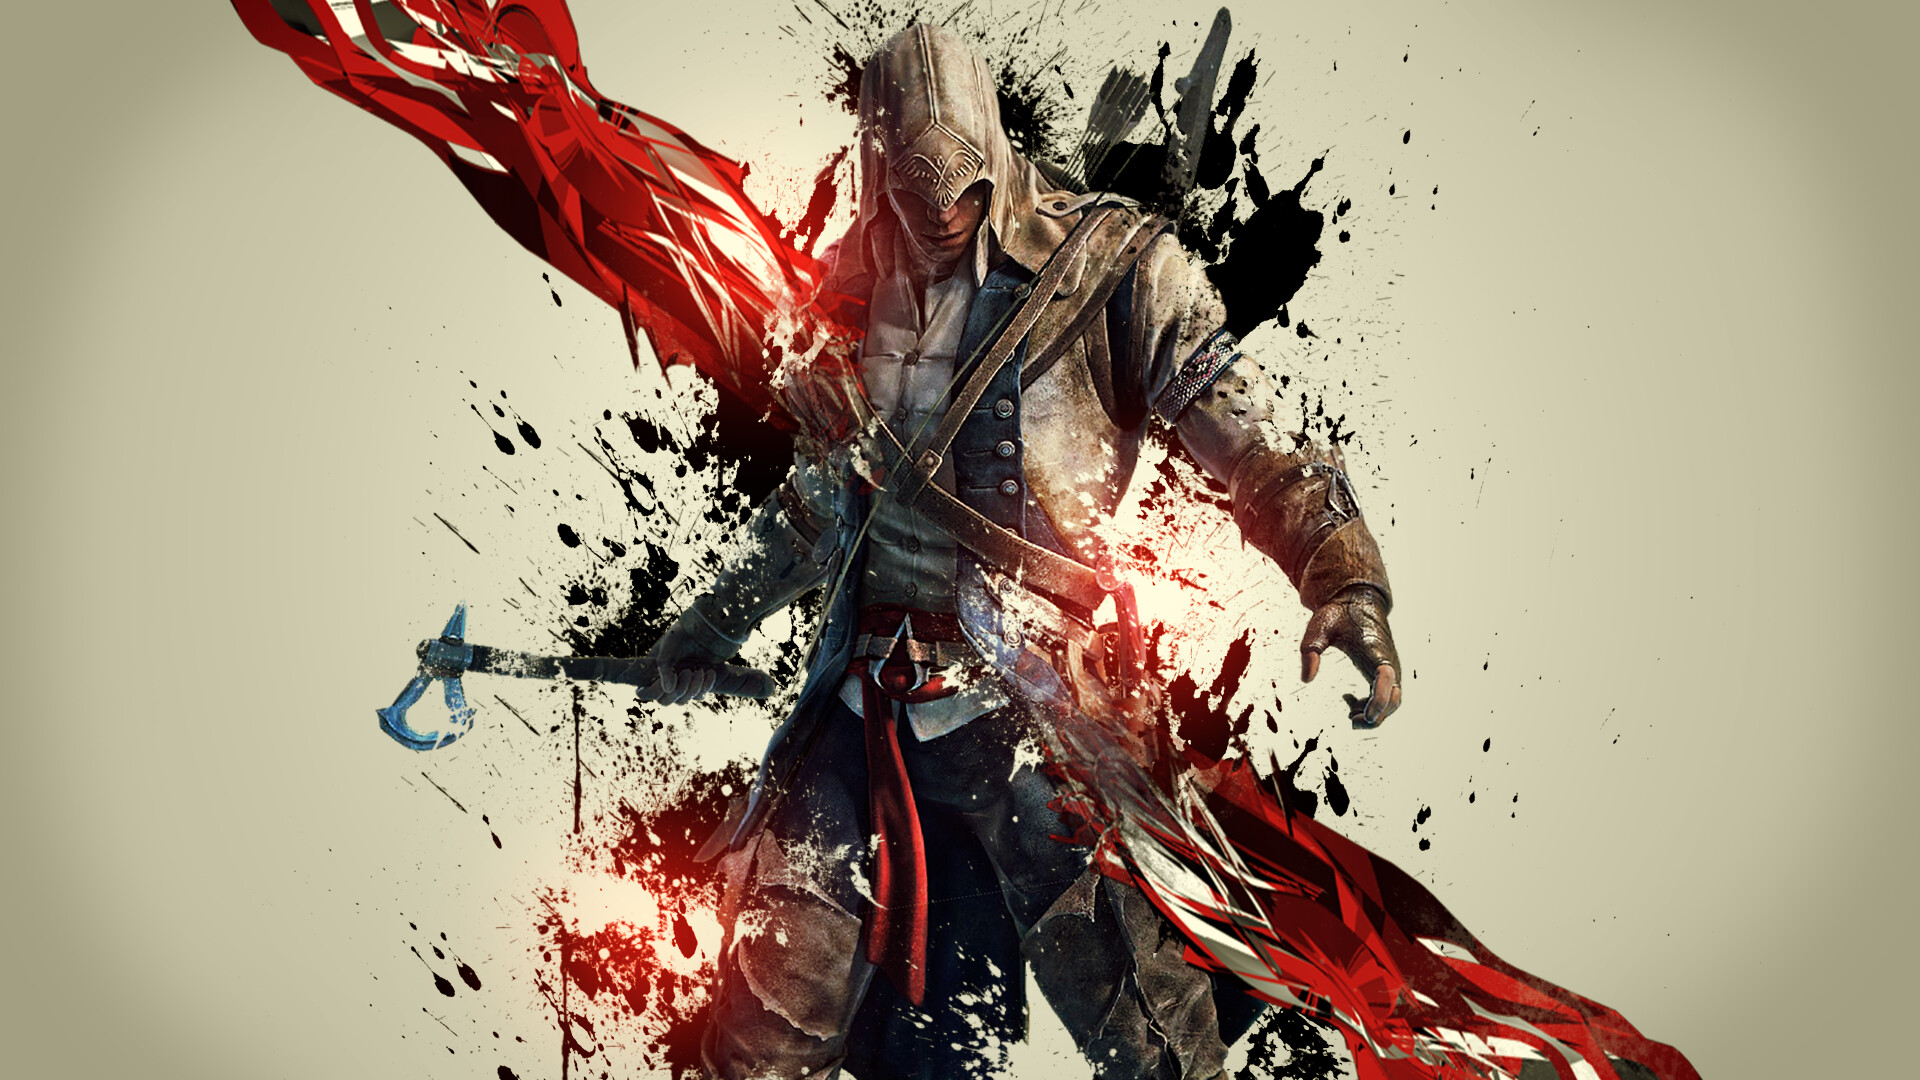 Assassin's Creed: The game tells the stories of Haytham Kenway and Ratonhnhake:ton. 1920x1080 Full HD Background.